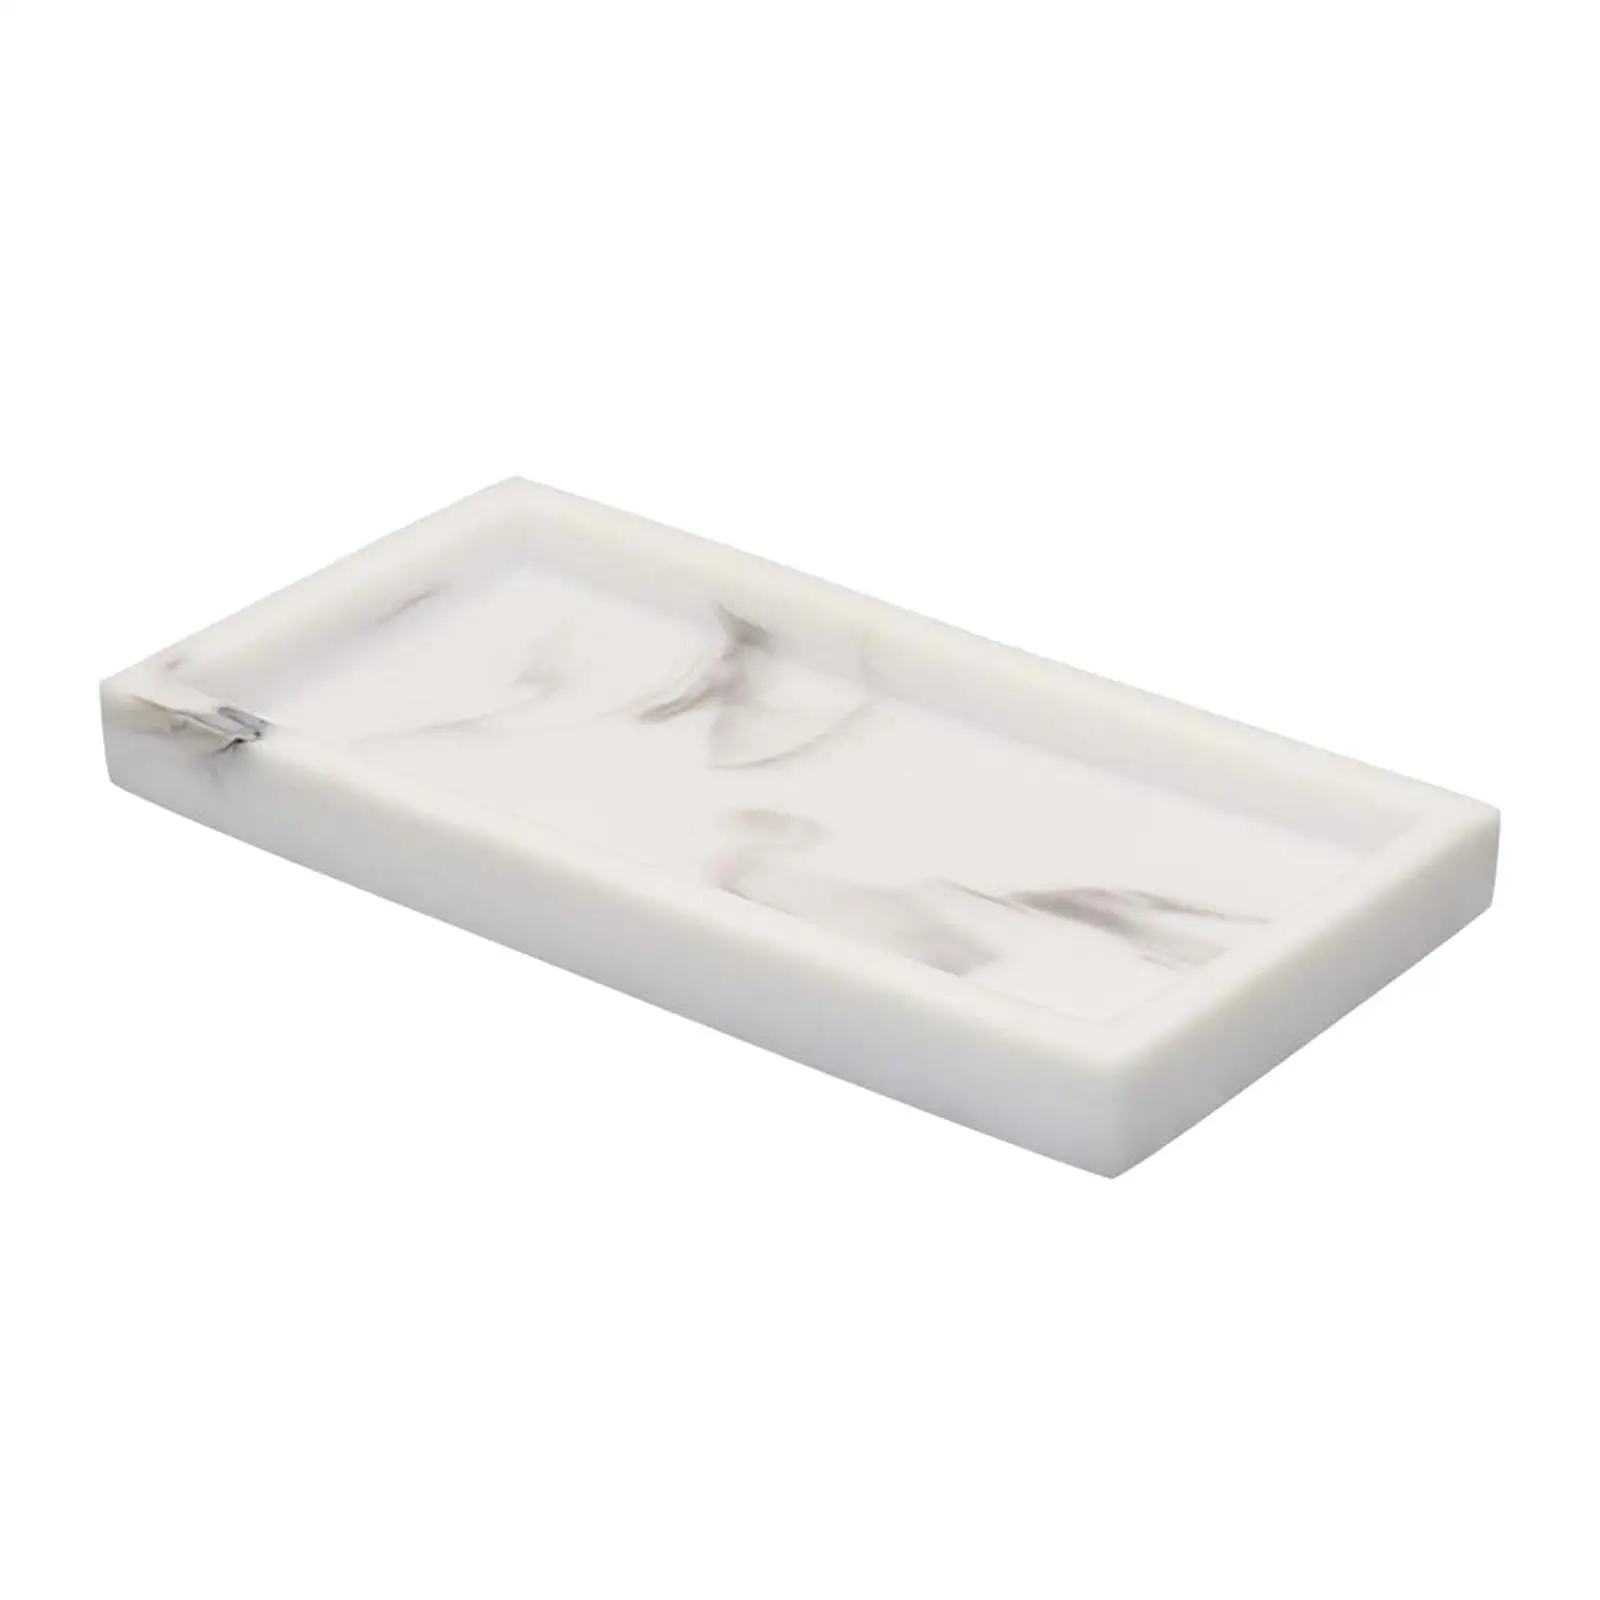 Marble Print Resin Bathtub Serving Tray Countertop for Soap Cosmetic Towel